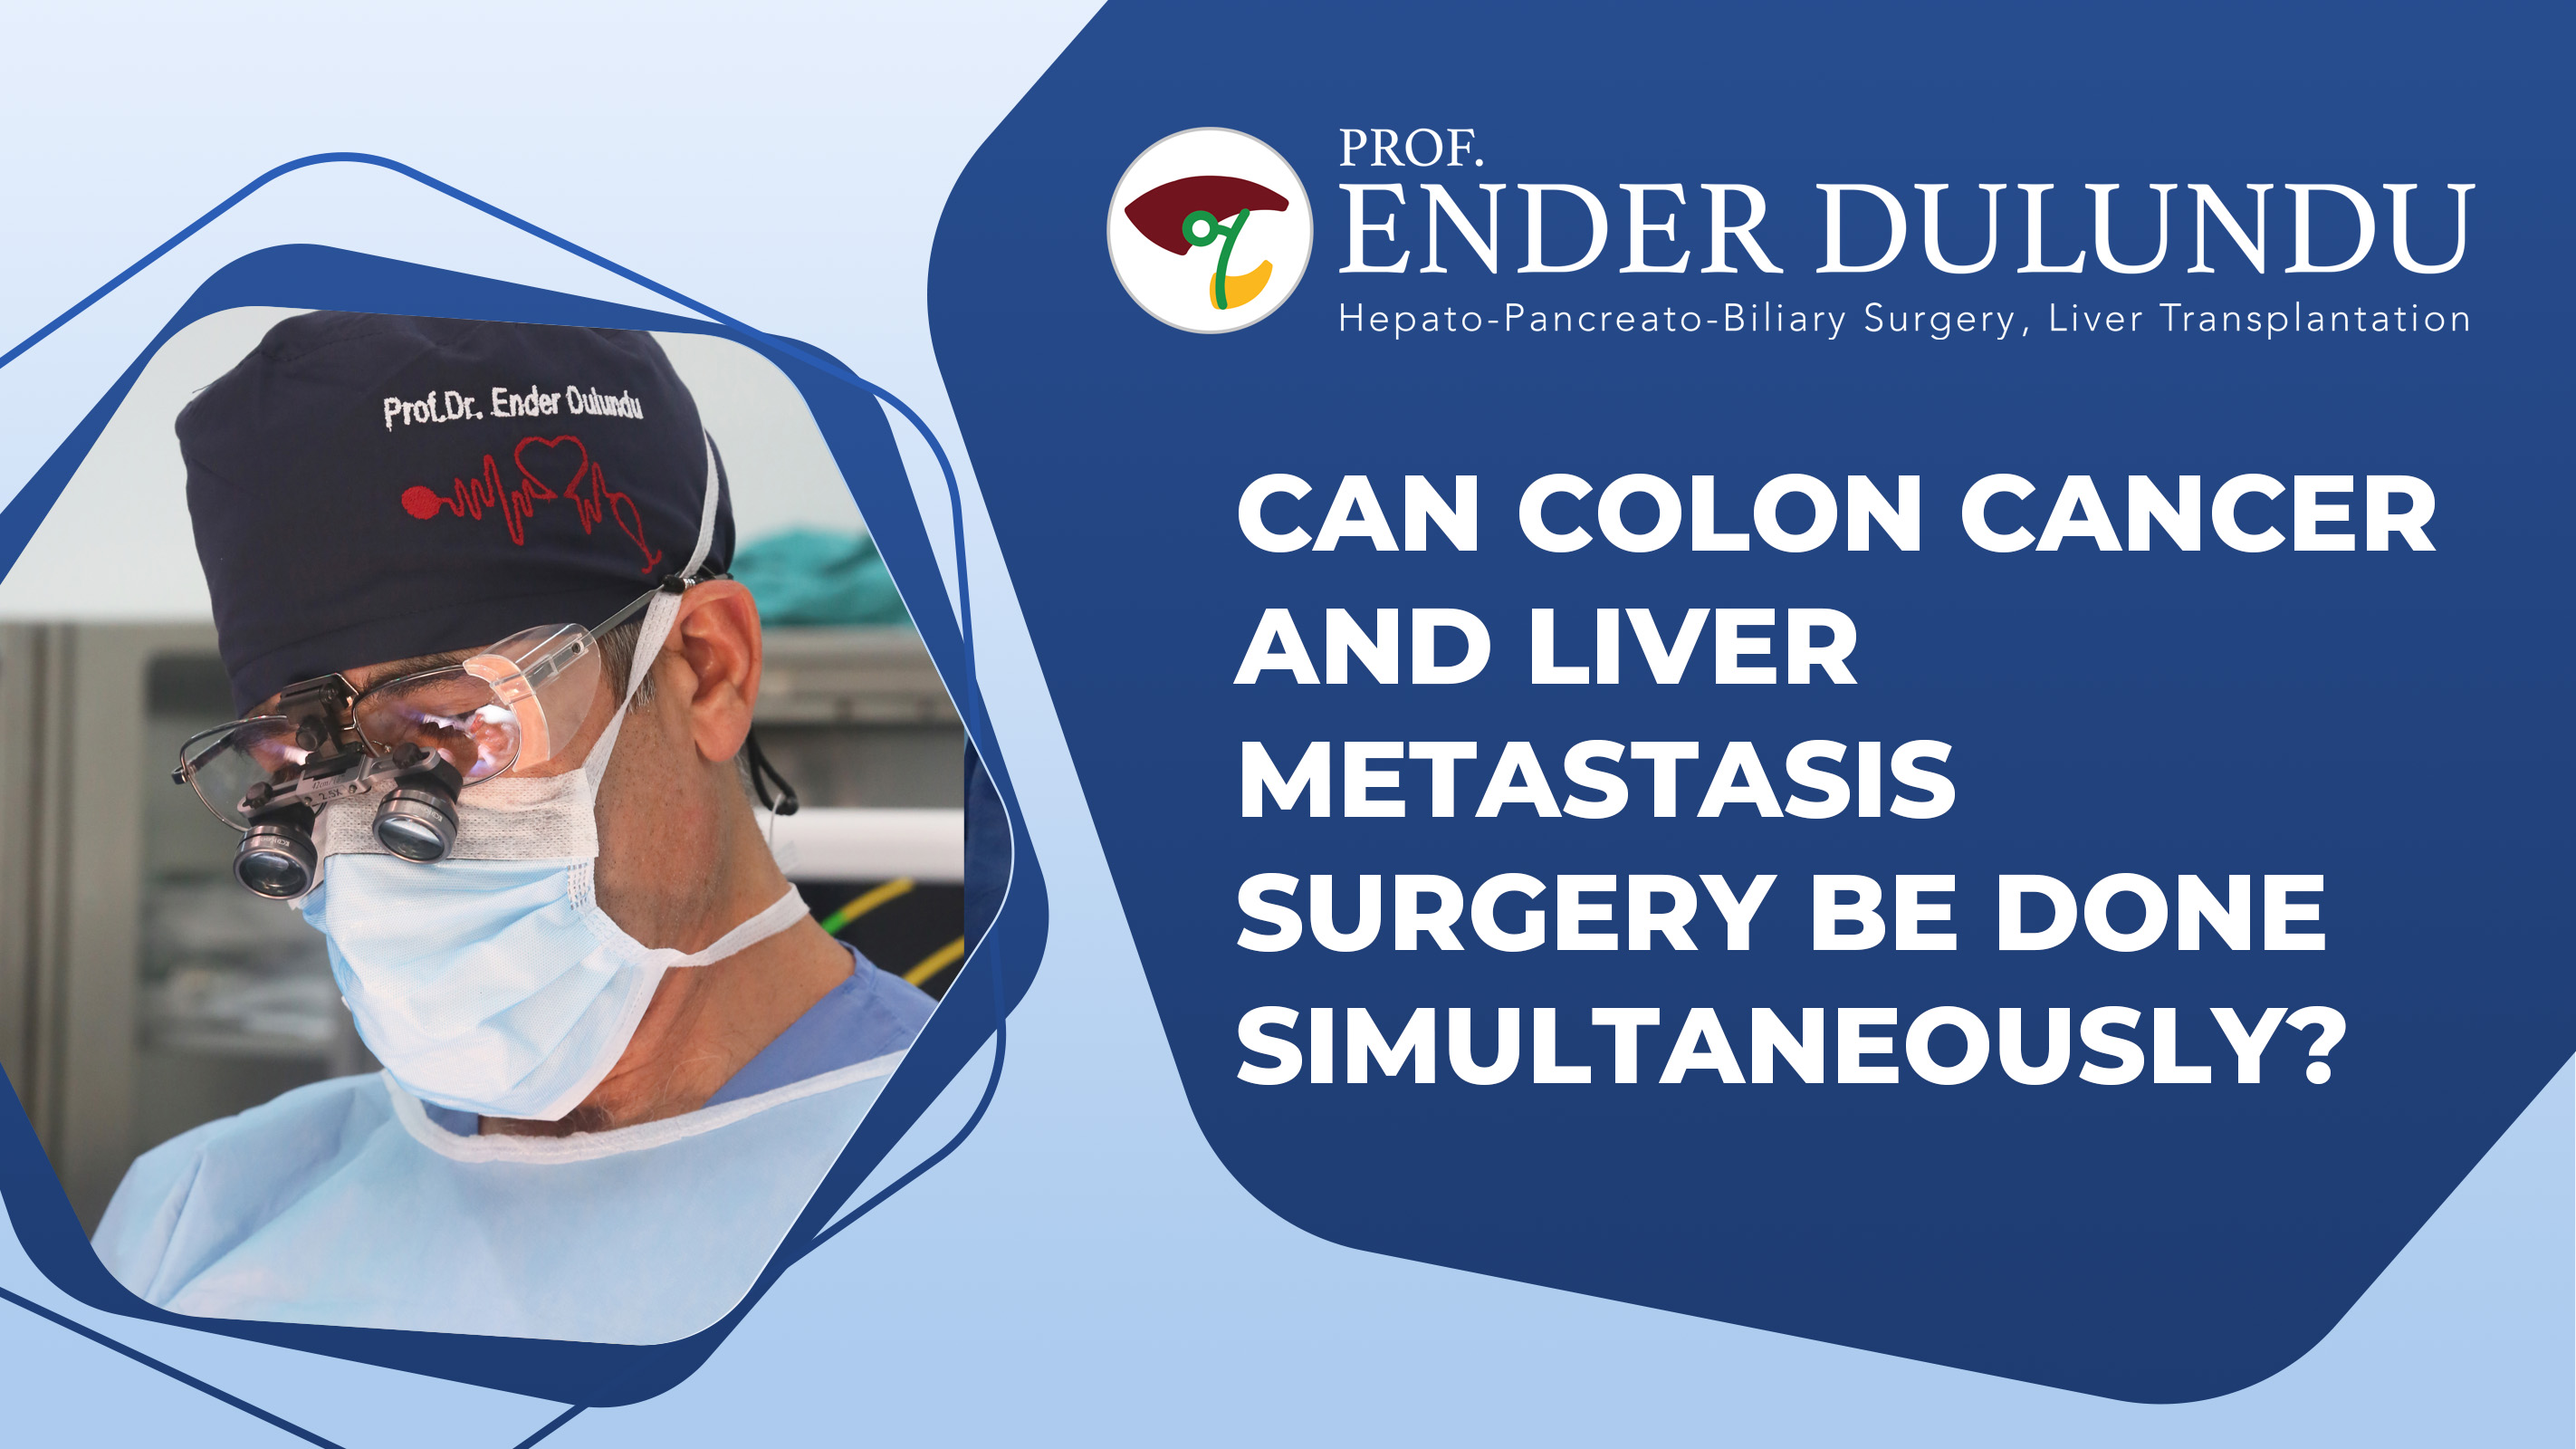 Can Colon Cancer And Liver Metastasis Surgery Be Done Simultaneously?